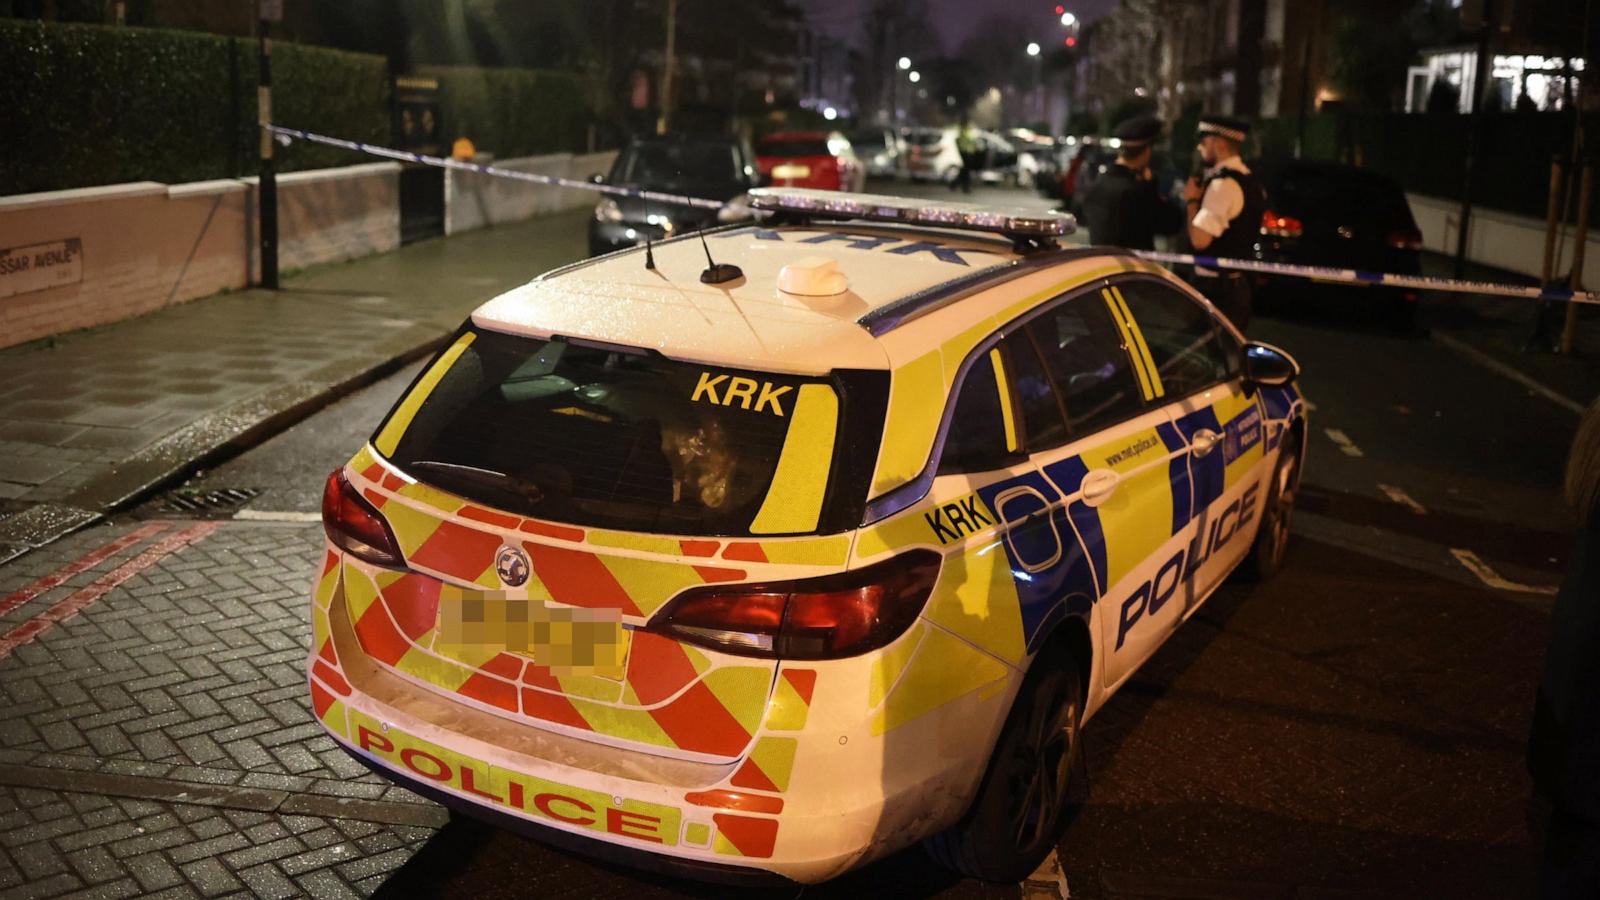 Children among 9 injured in 'corrosive substance' attack in London